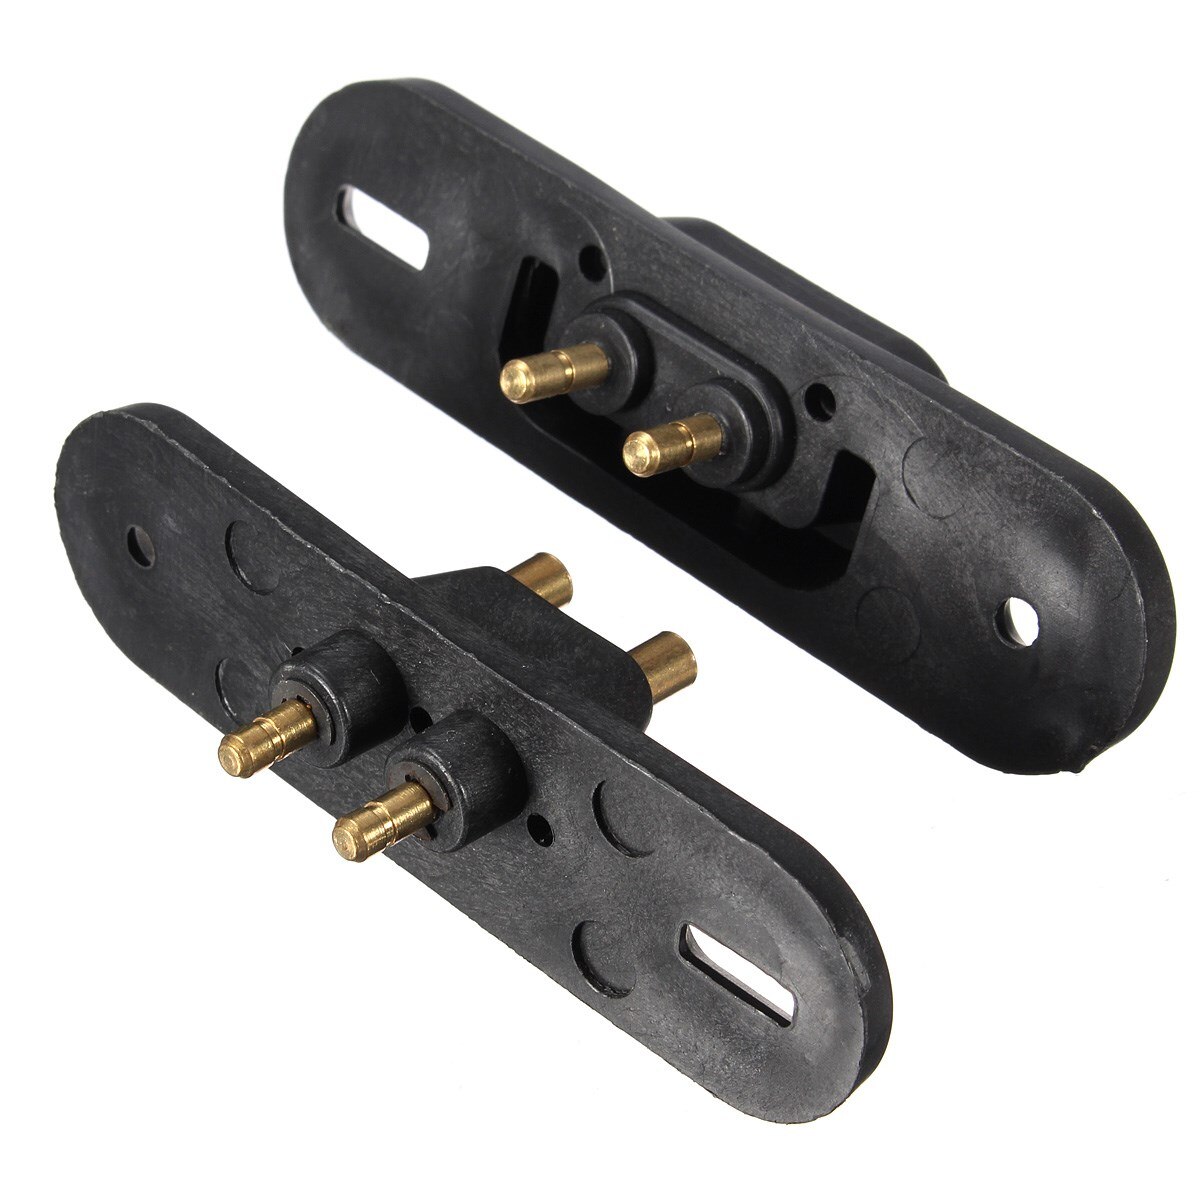 2Pcs Black Sliding Door Contact Switch Central Locking Systems Car Alarm For VW/T4/FORD Van